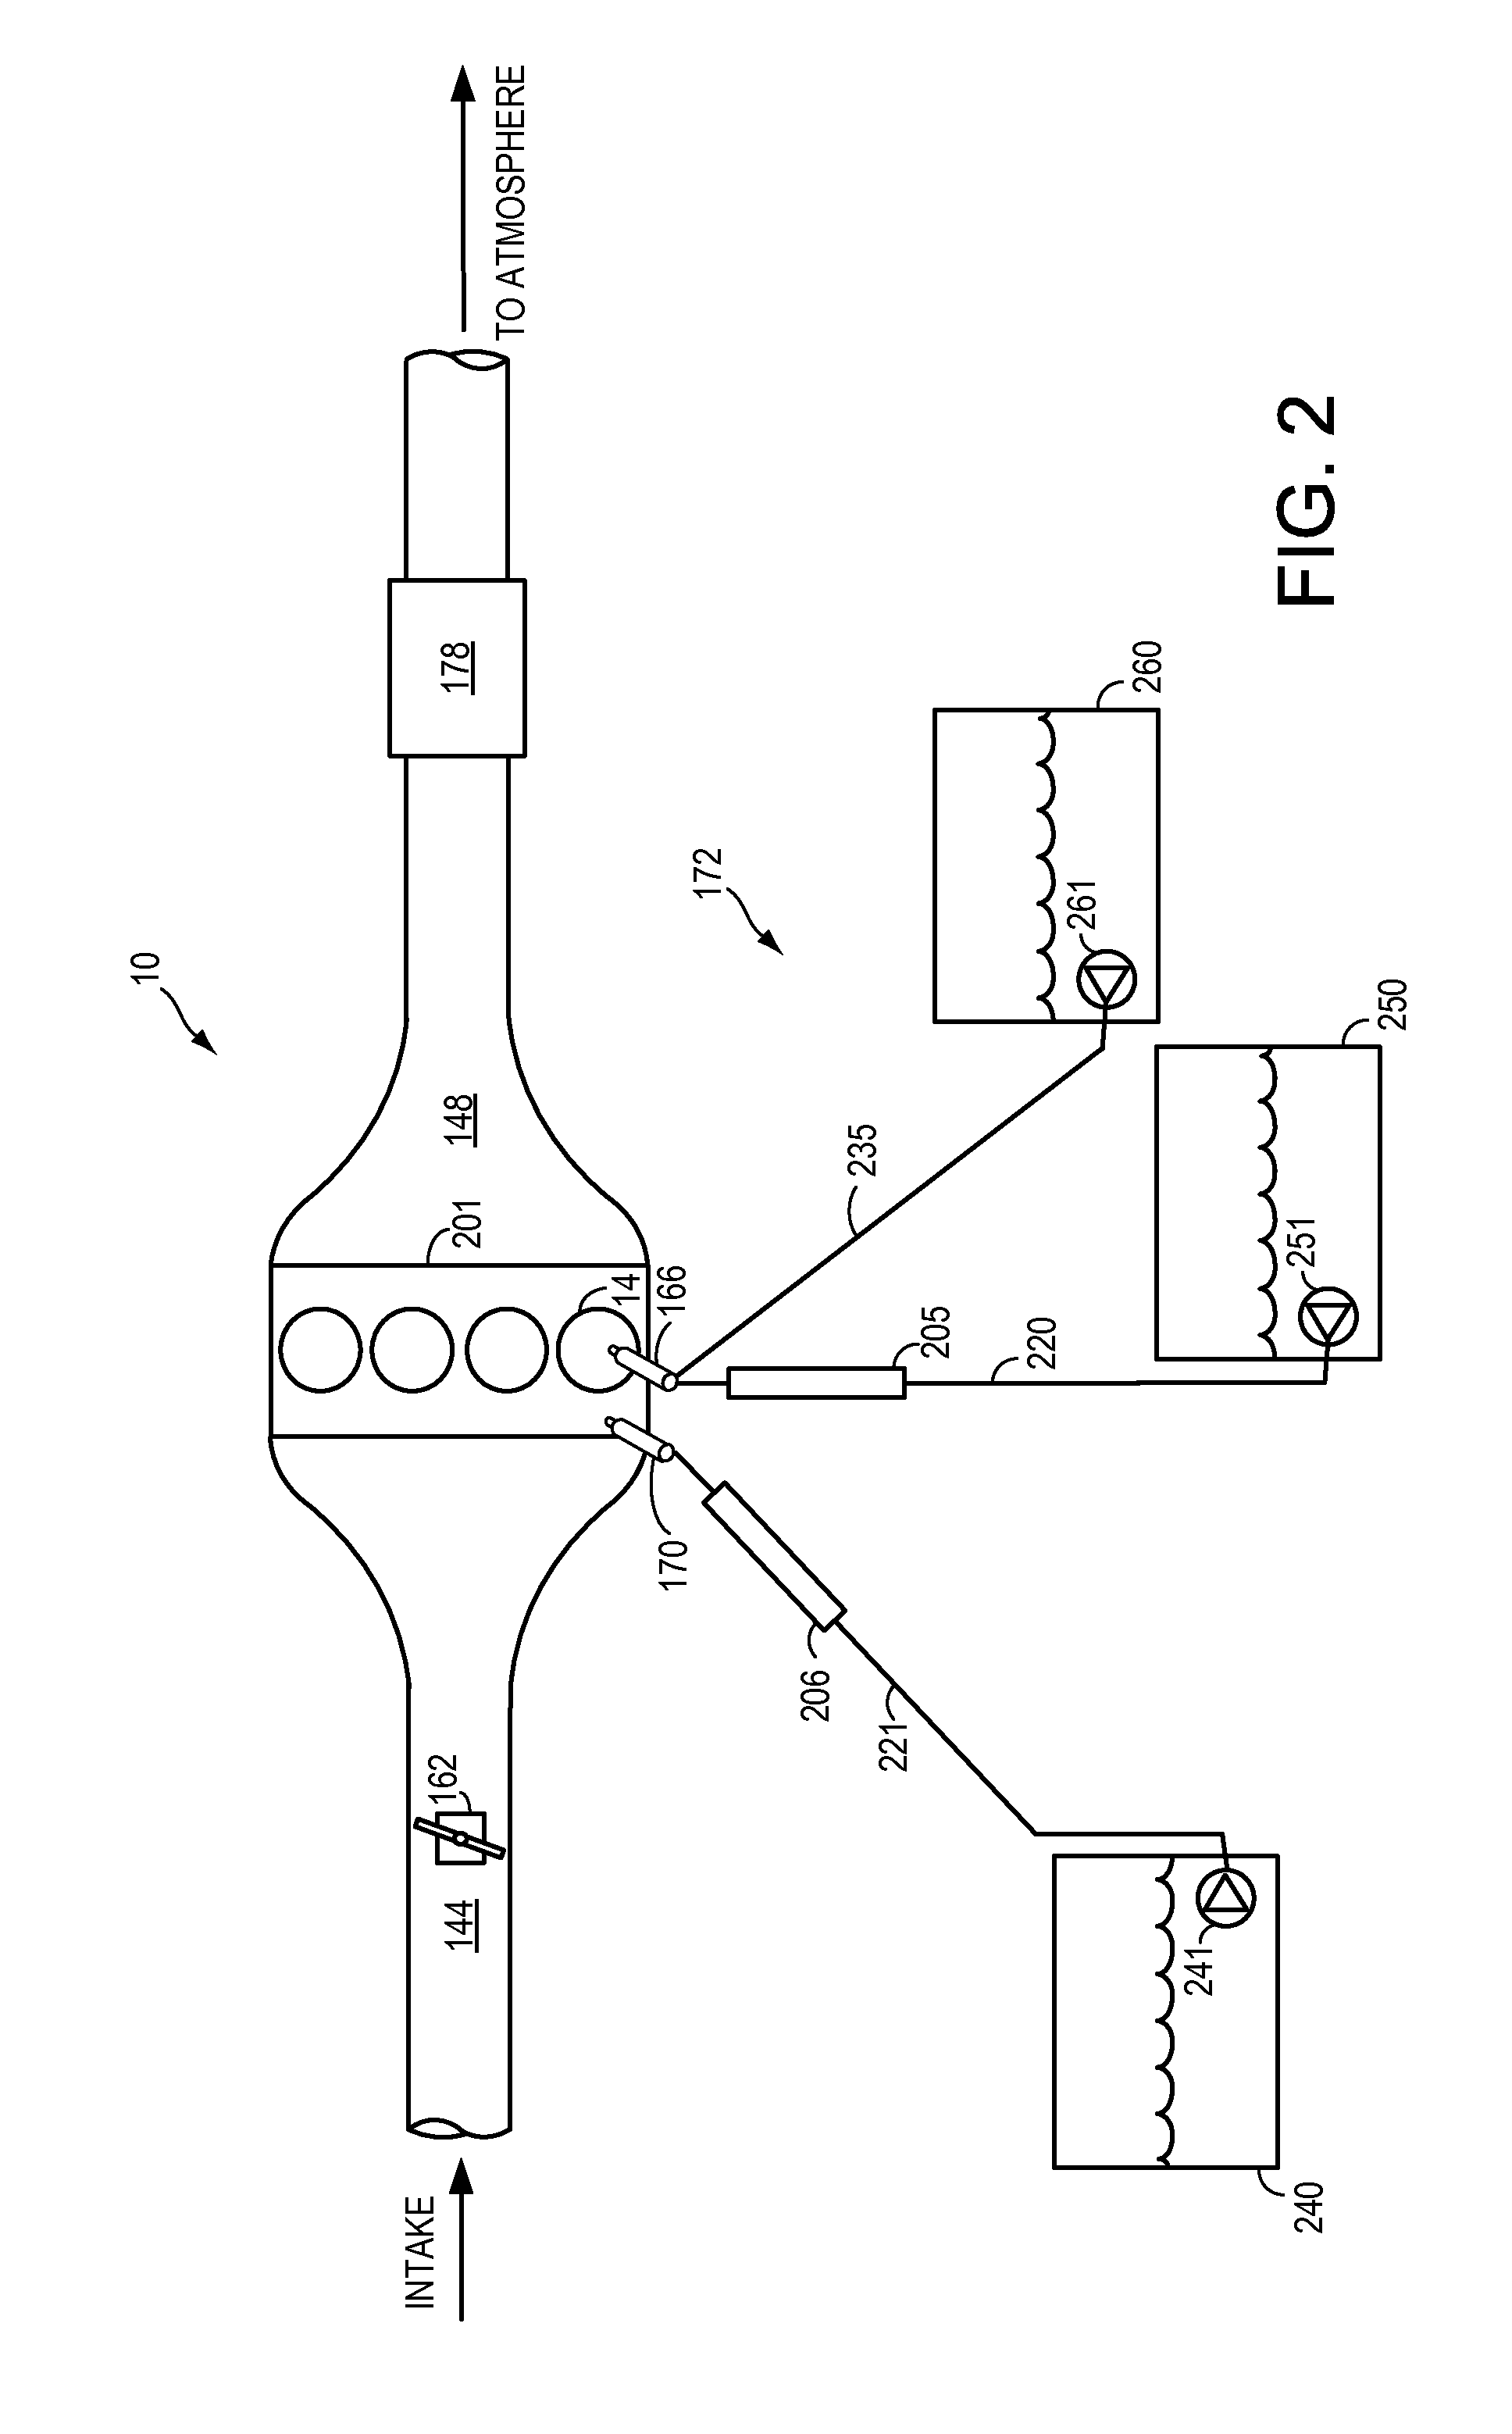 Direct injection of diluents or secondary fuels in gaseous fuel engines